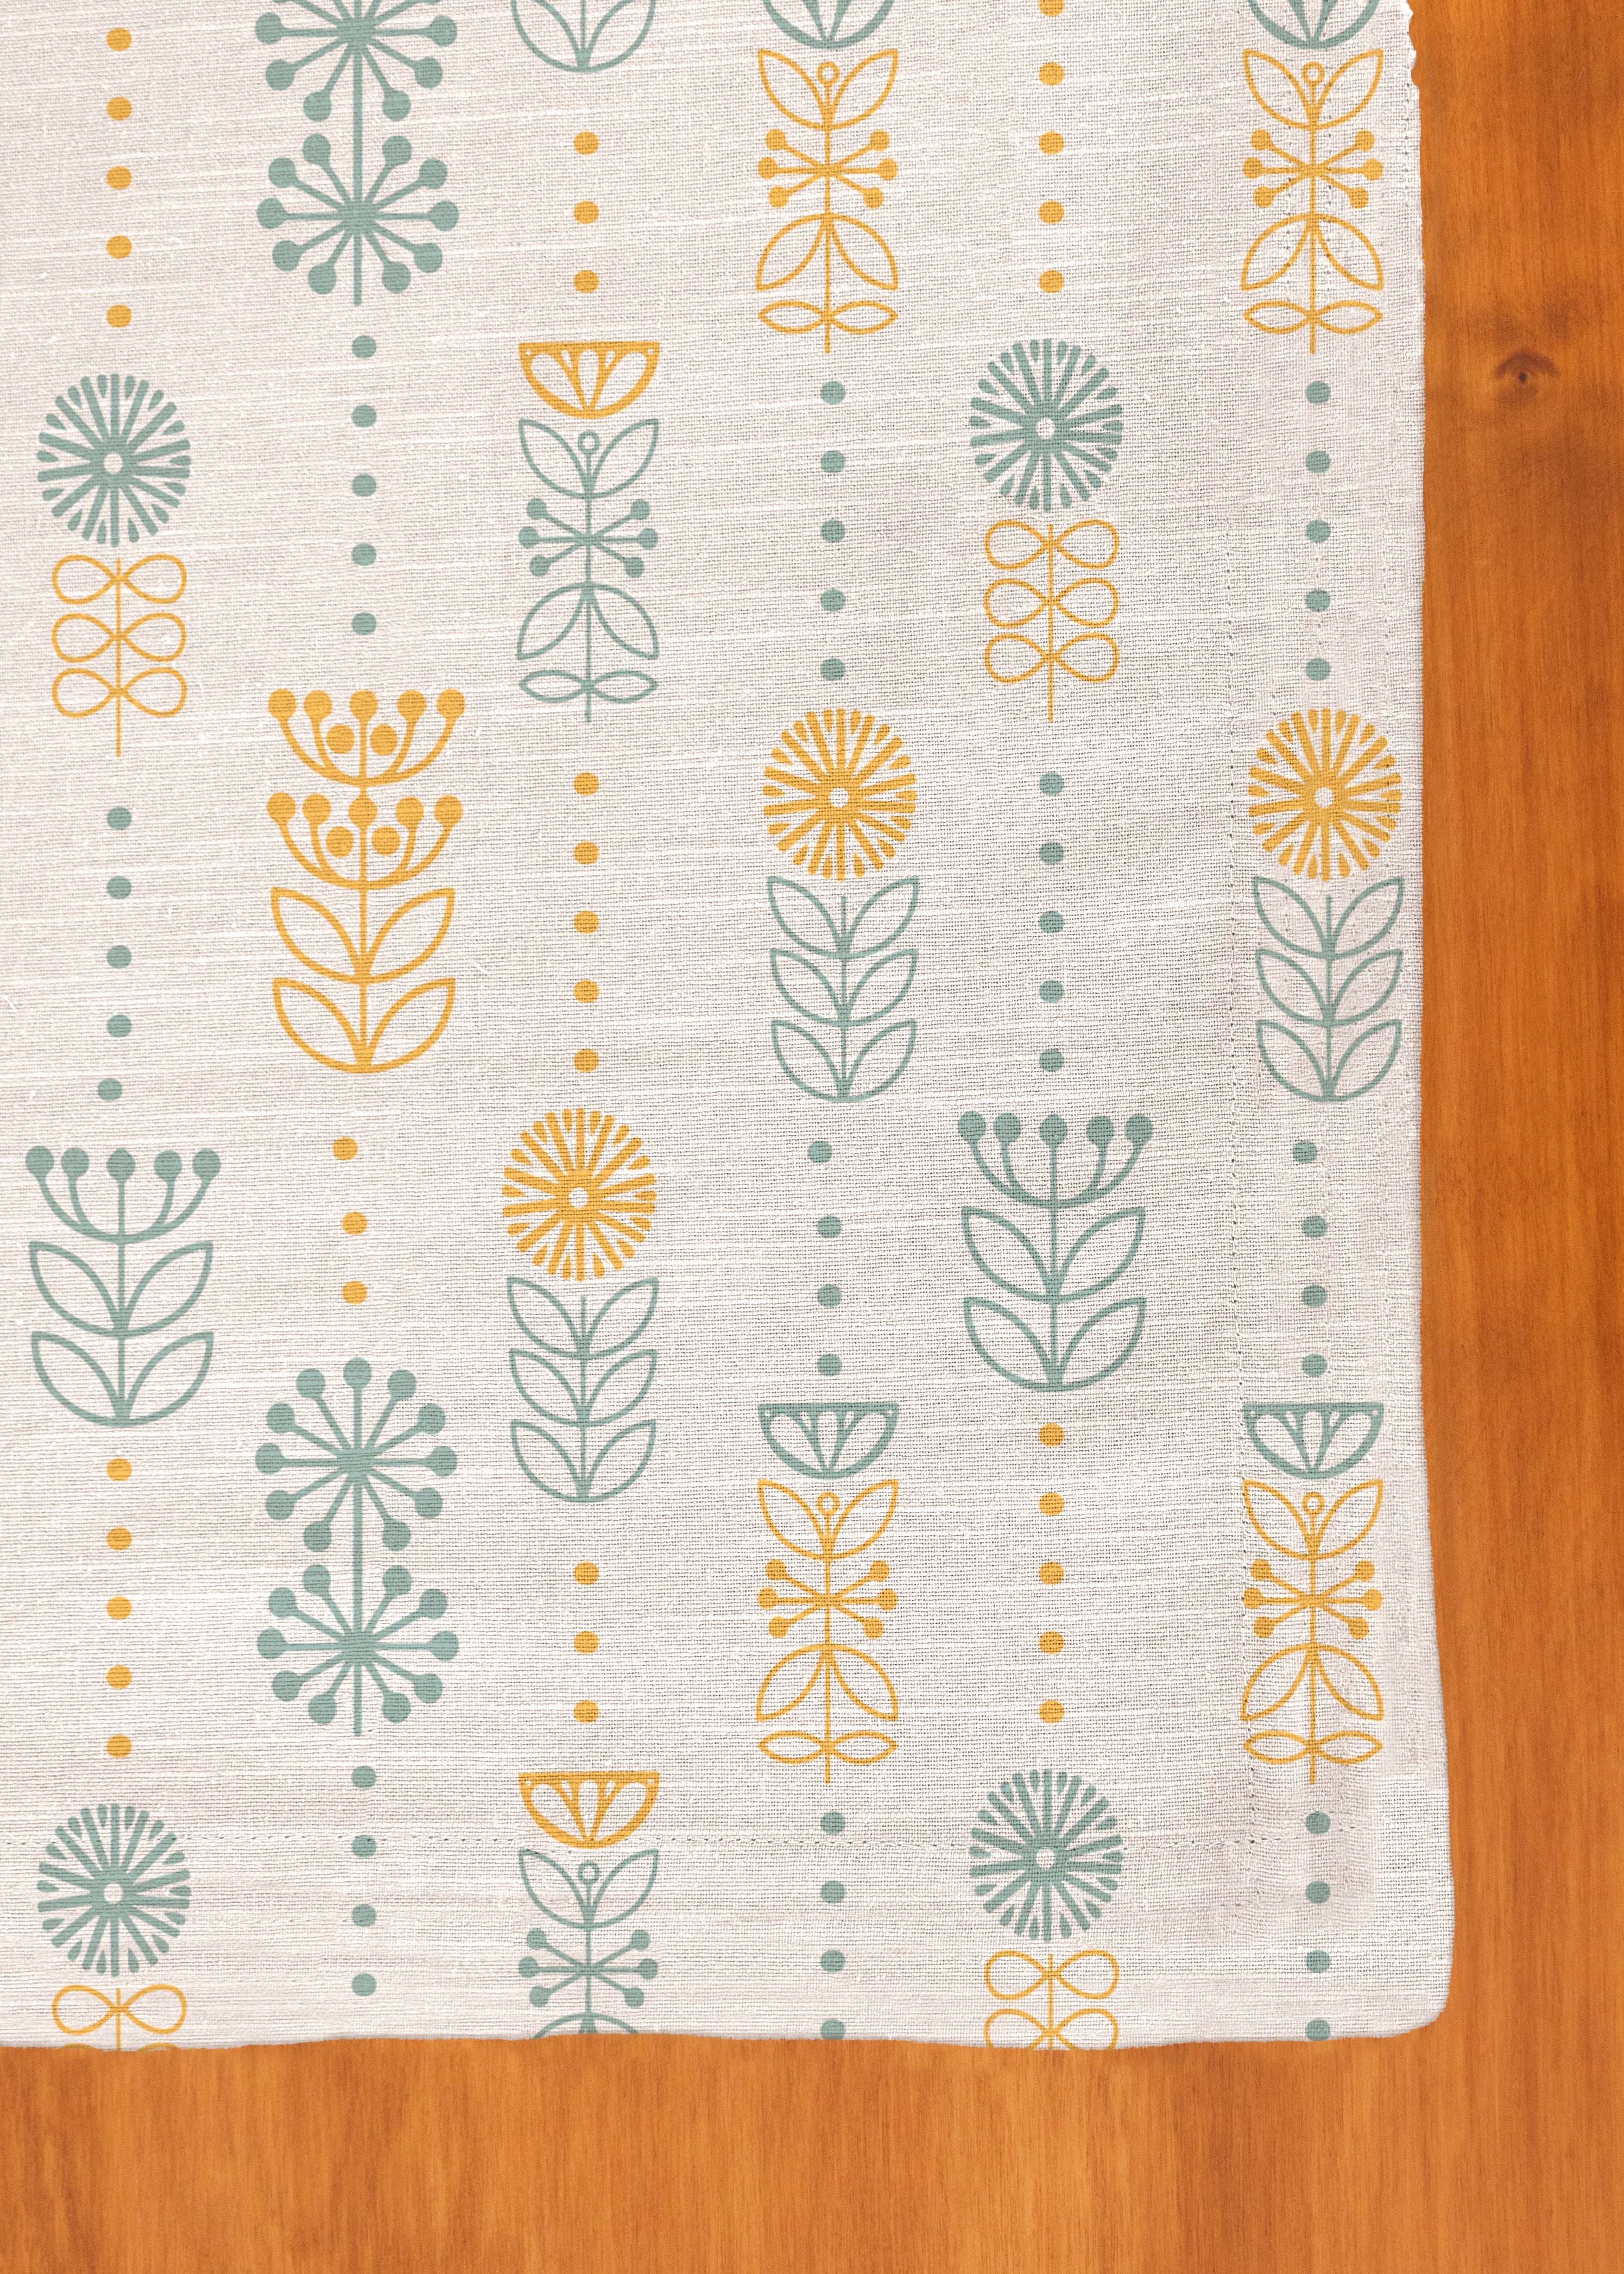 Wild Bouquet Printed Cotton Table Cloth - Corn Yellow